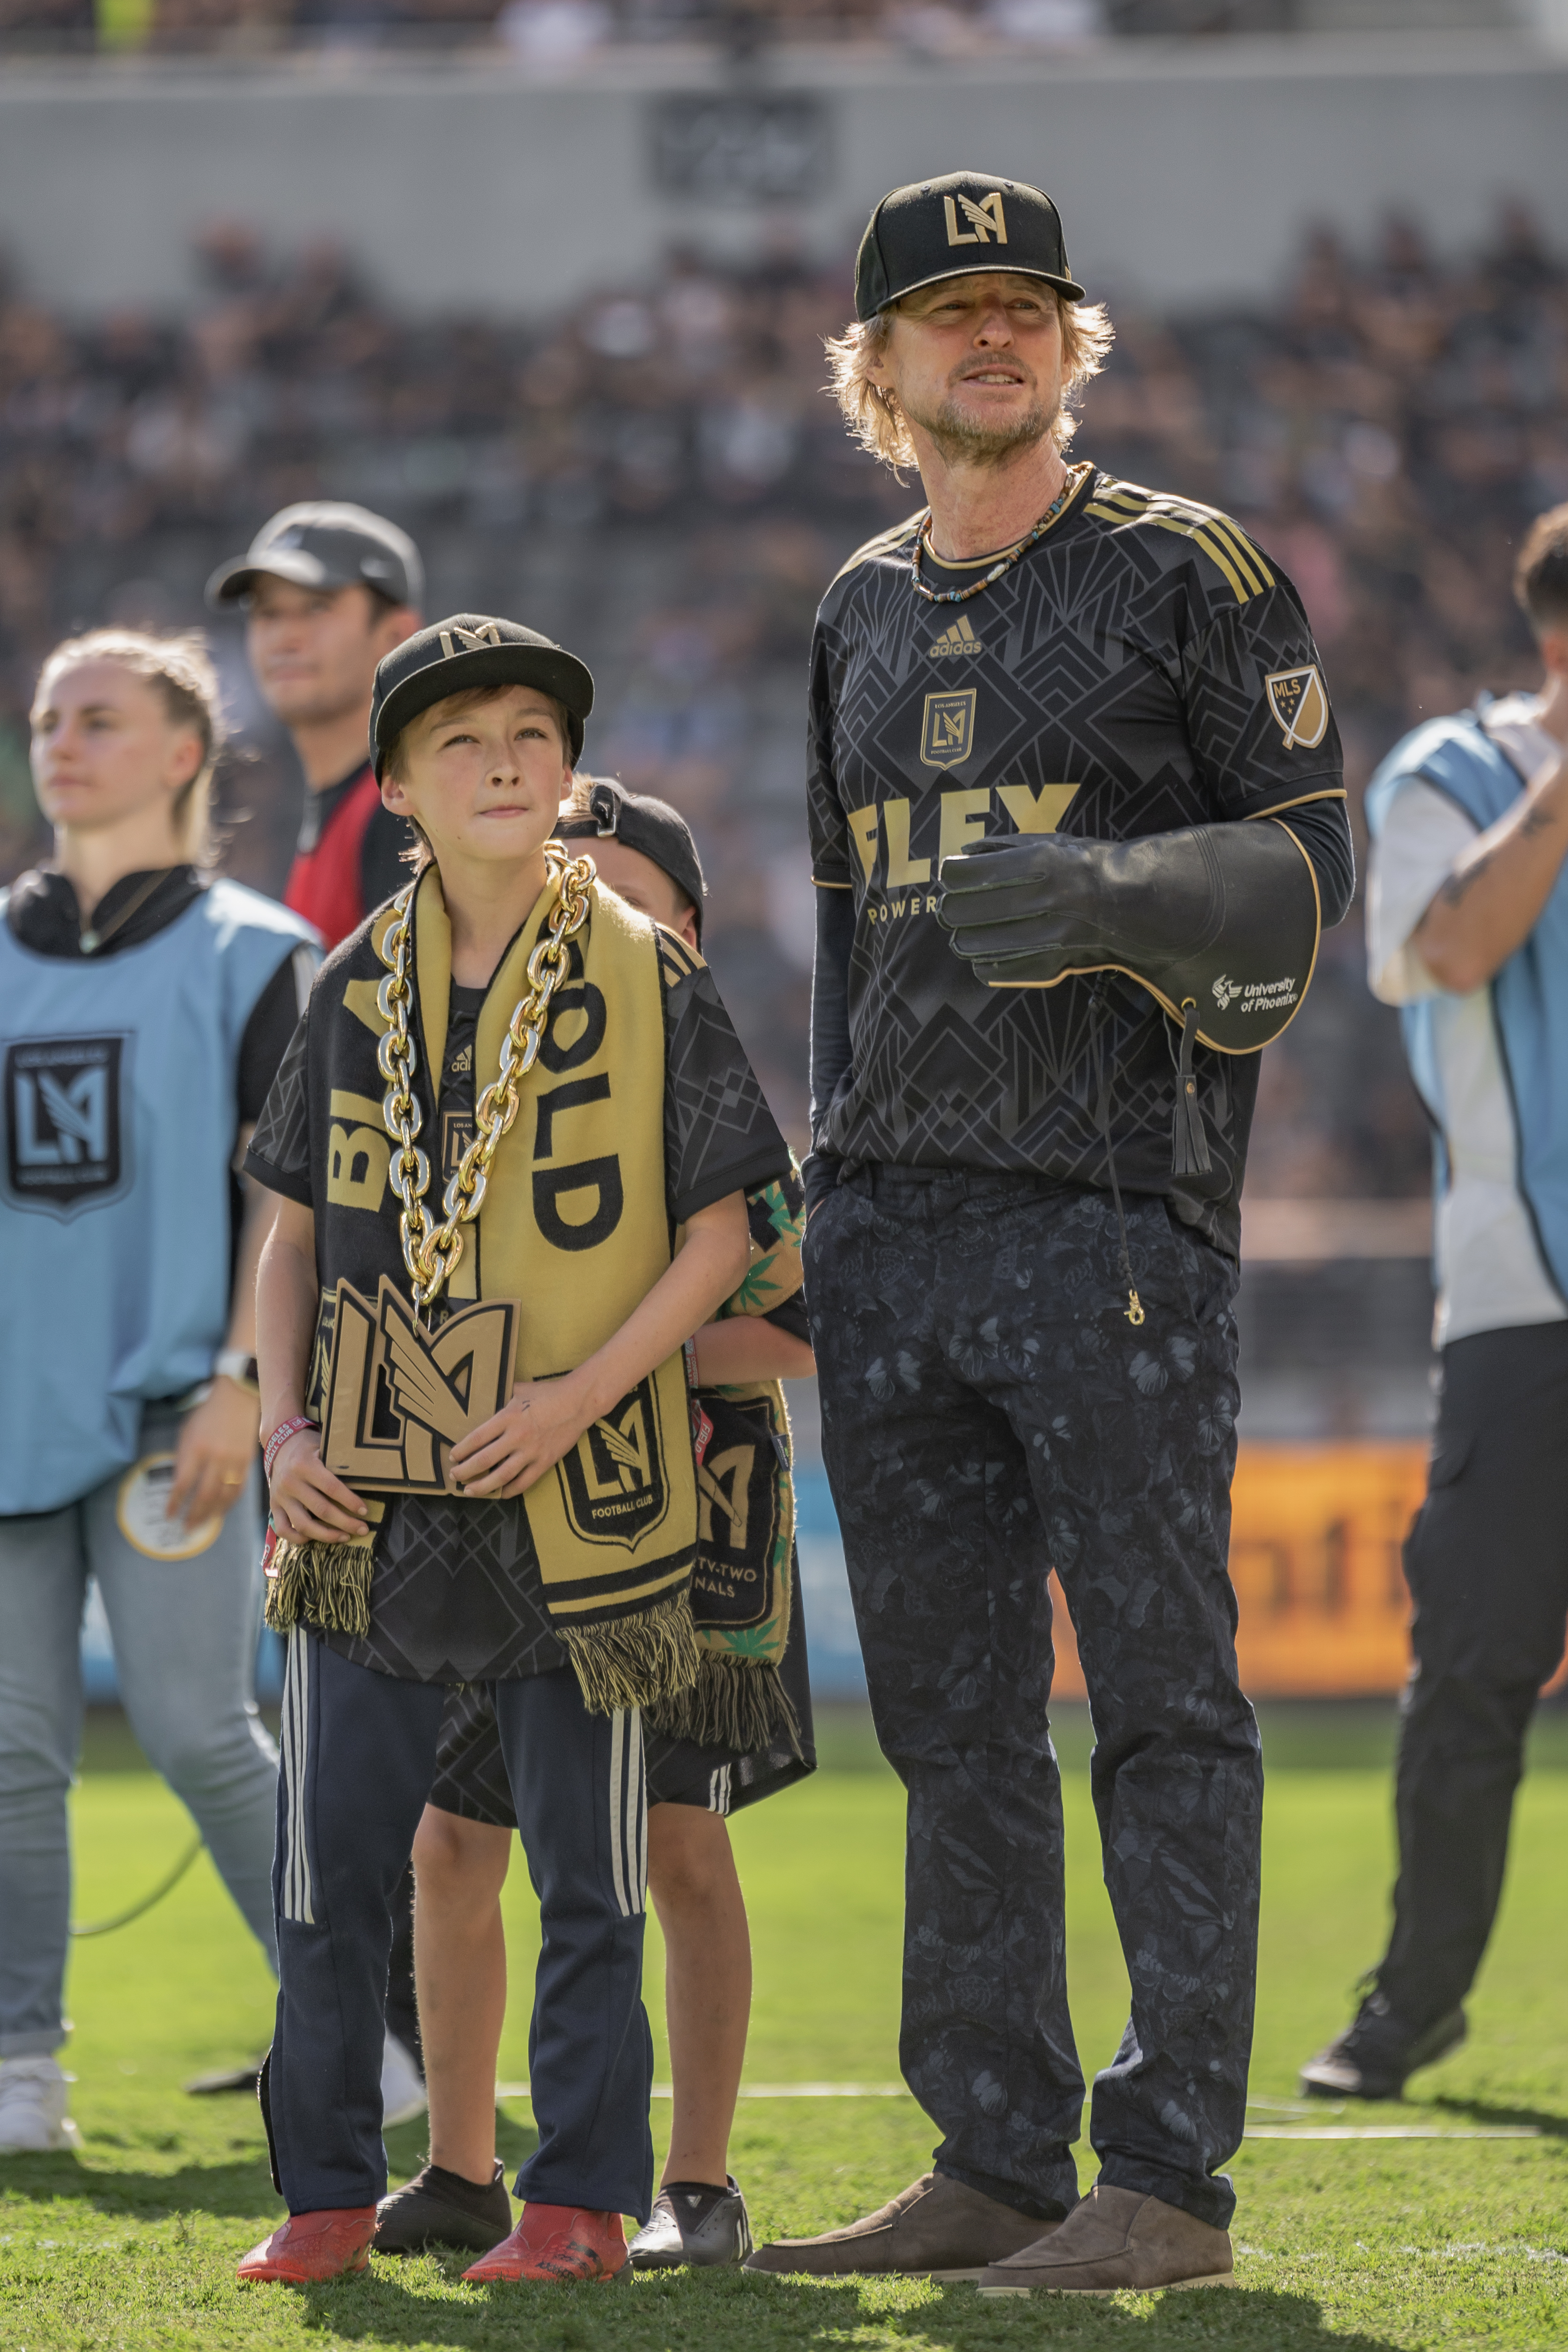 Owen Wilson and his son at the 2022 MLS Cup Playoffs | Source: Getty Images